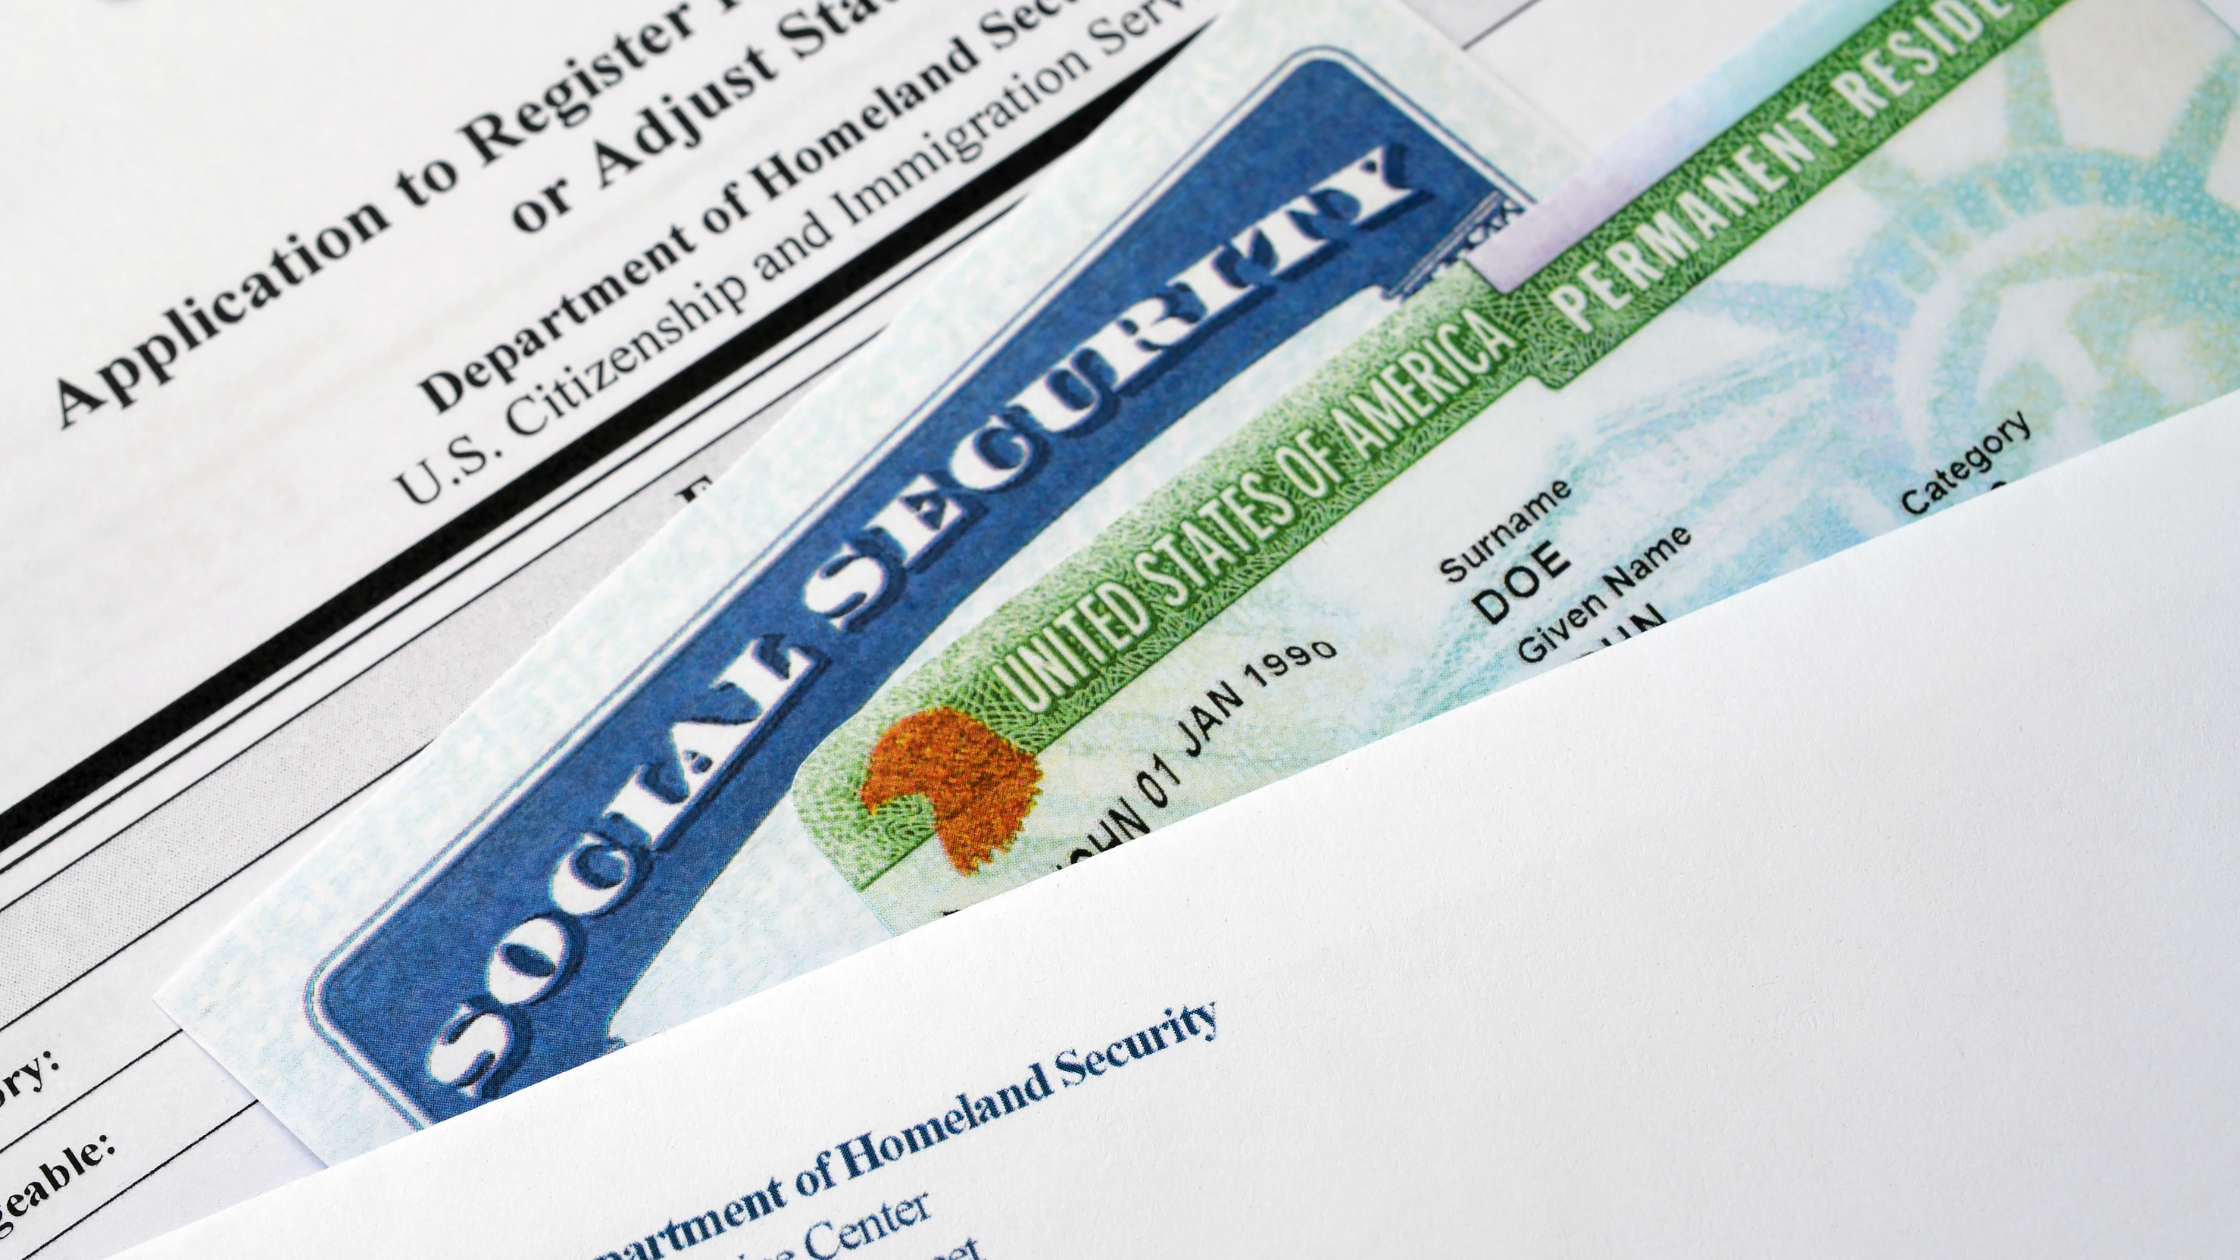 USCIS Policy Documents - Social Security, Application Form & Green Card